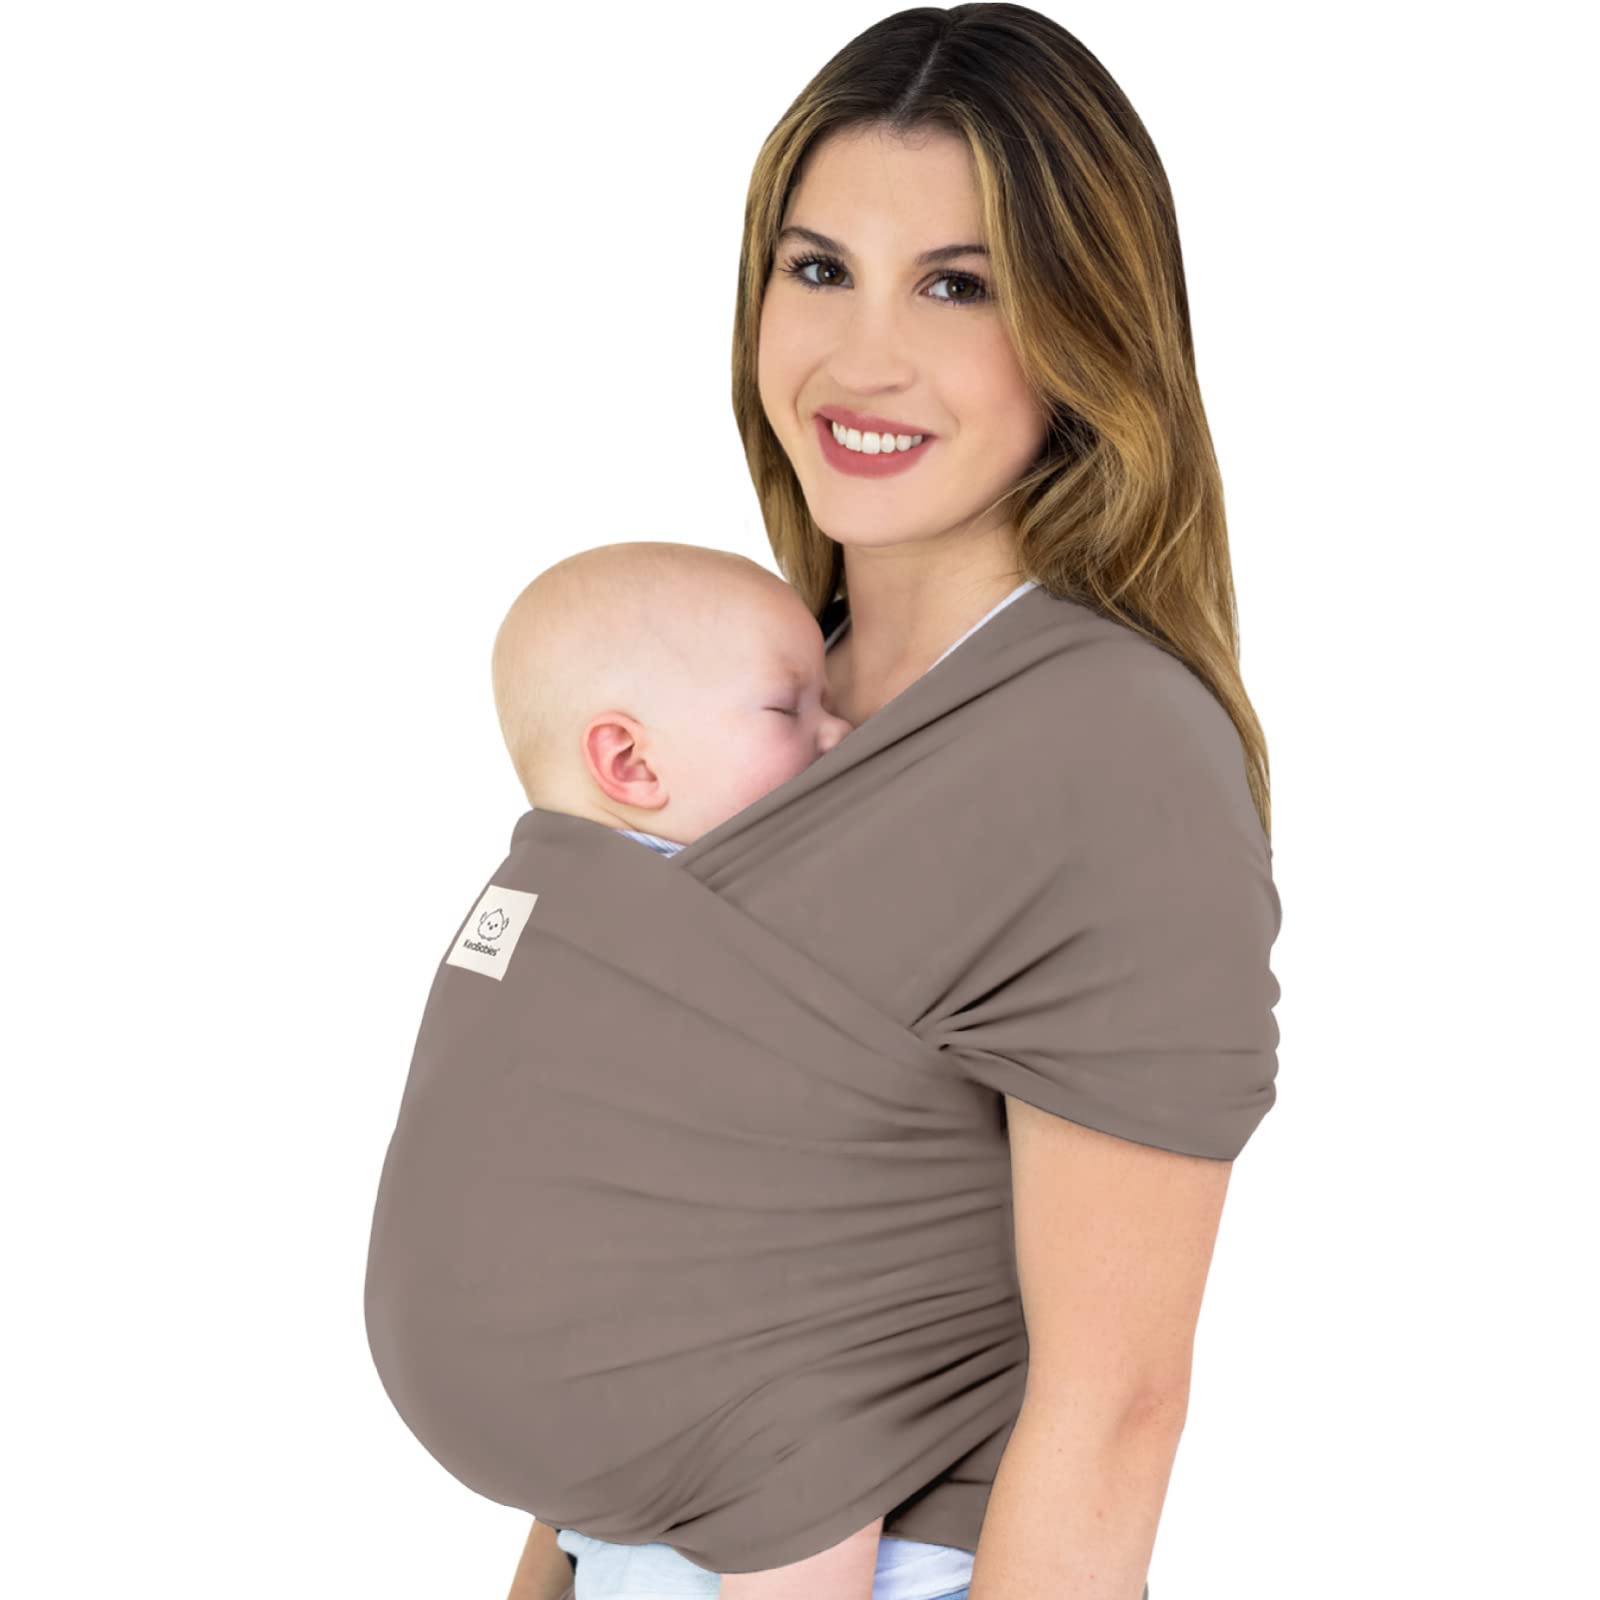 KeaBabies Baby Wrap Carrier - All in 1 Original Breathable Baby Sling, Lightweight Hands Free Baby Carrier Sling, Baby Carrier Wrap, Baby Carriers for Newborn, Infant, Baby Wraps Carrier (Copper Gray)